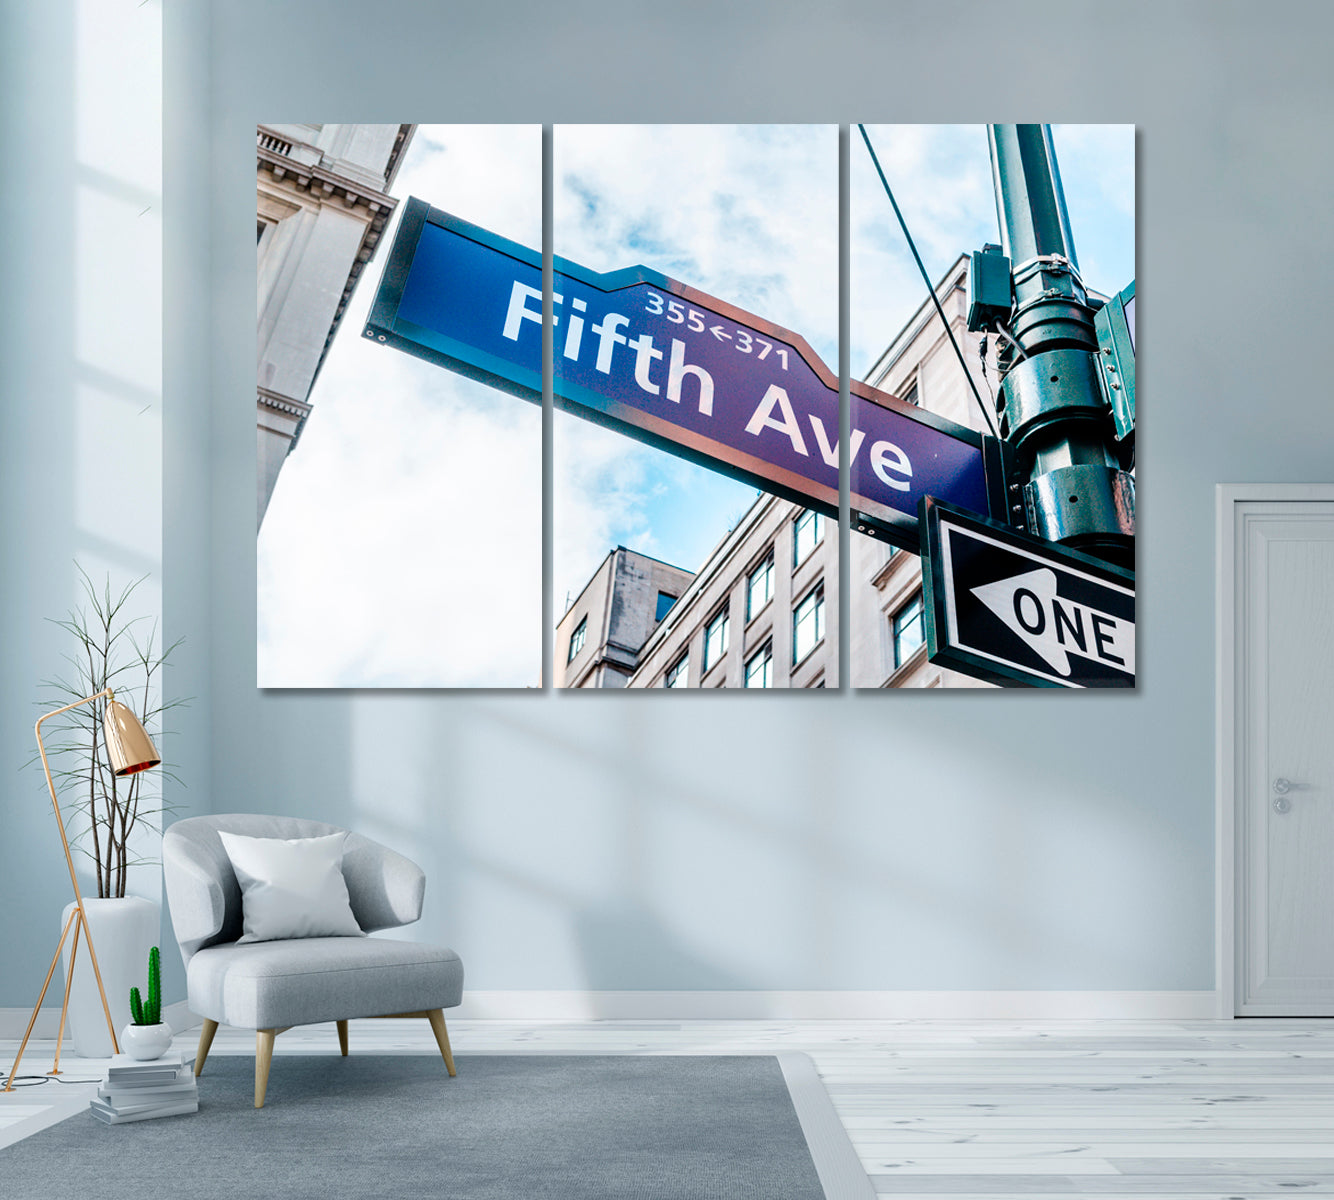 5th Avenue Sign New York Canvas Print ArtLexy 3 Panels 36"x24" inches 